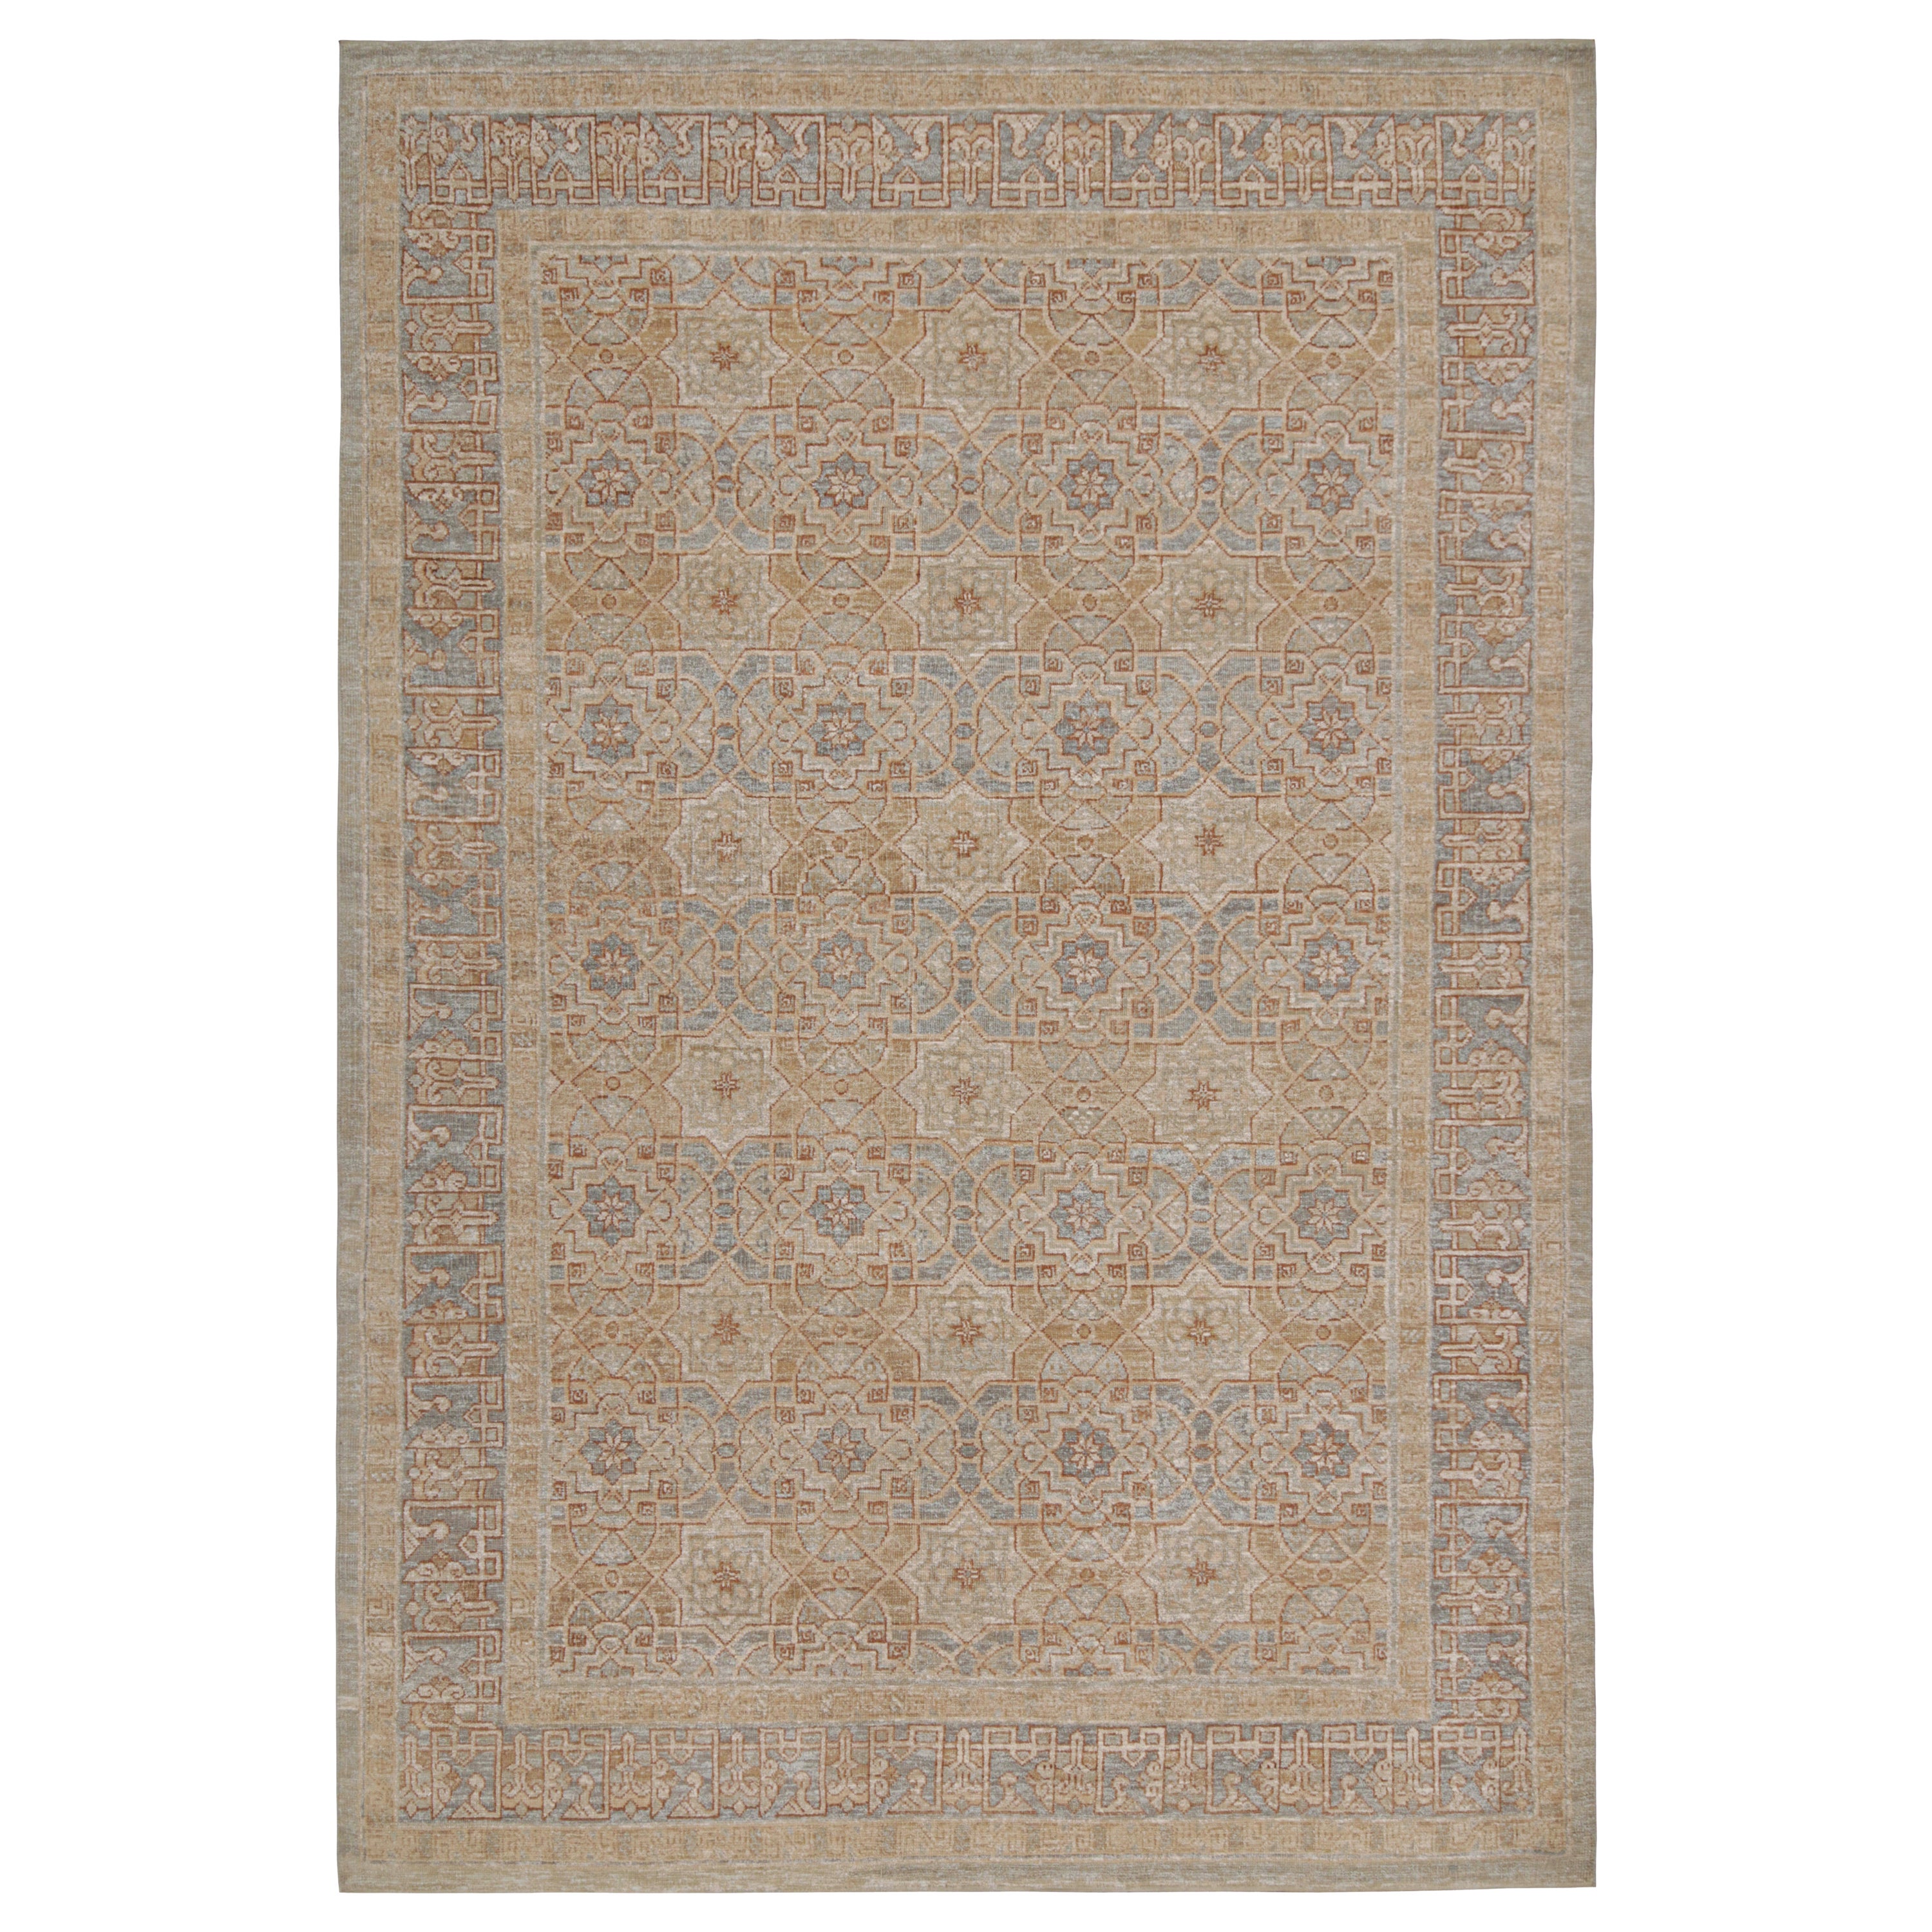 Rug & Kilim’s Oushak Style Rug in Beige-Brown & Blue Geometric Patterns For Sale